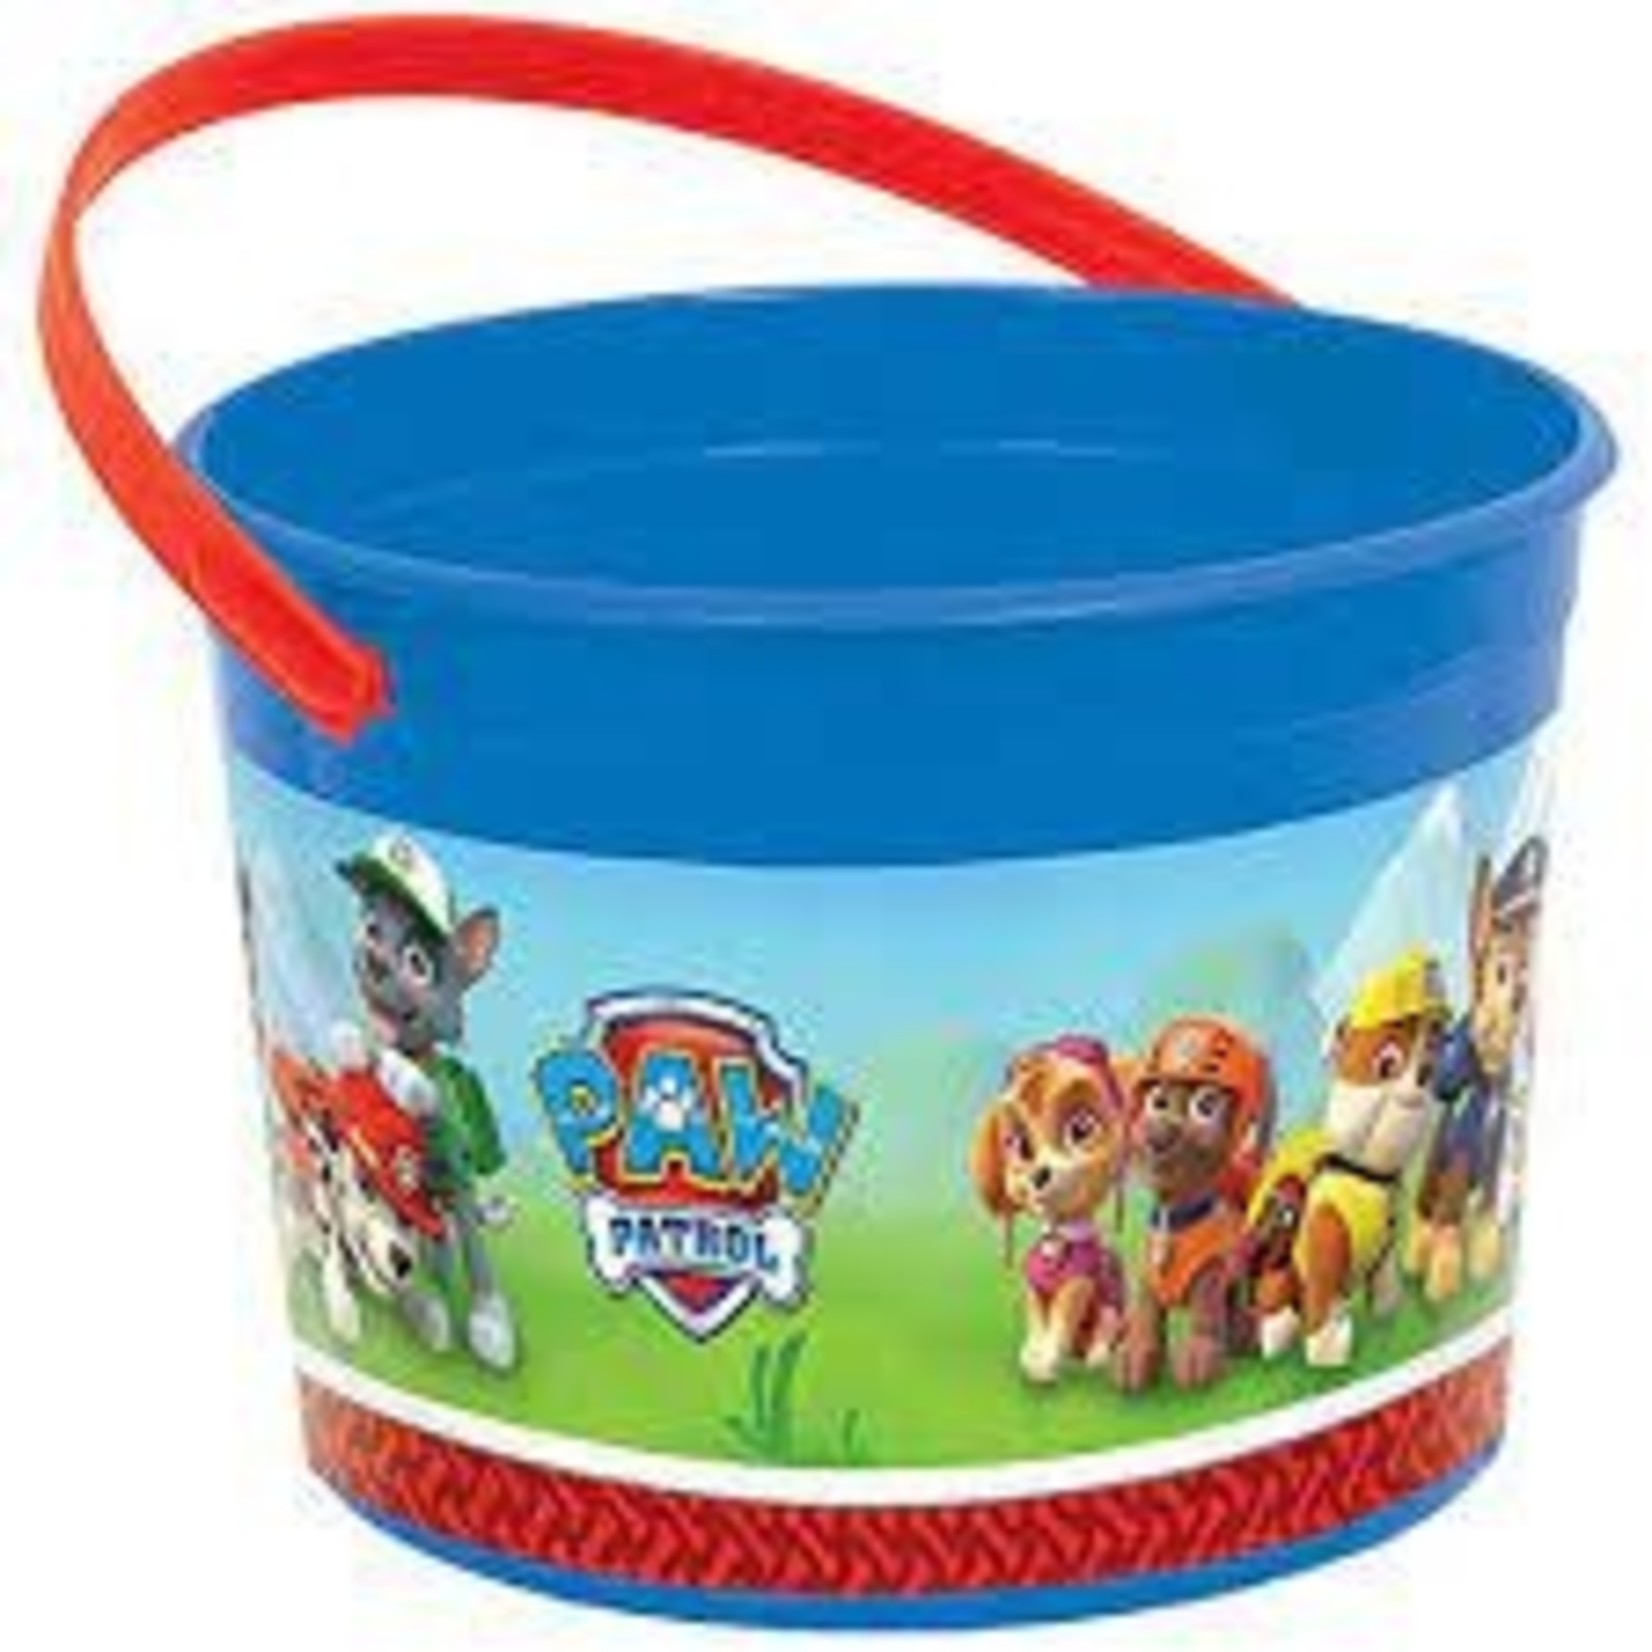 Paw Patrol Container